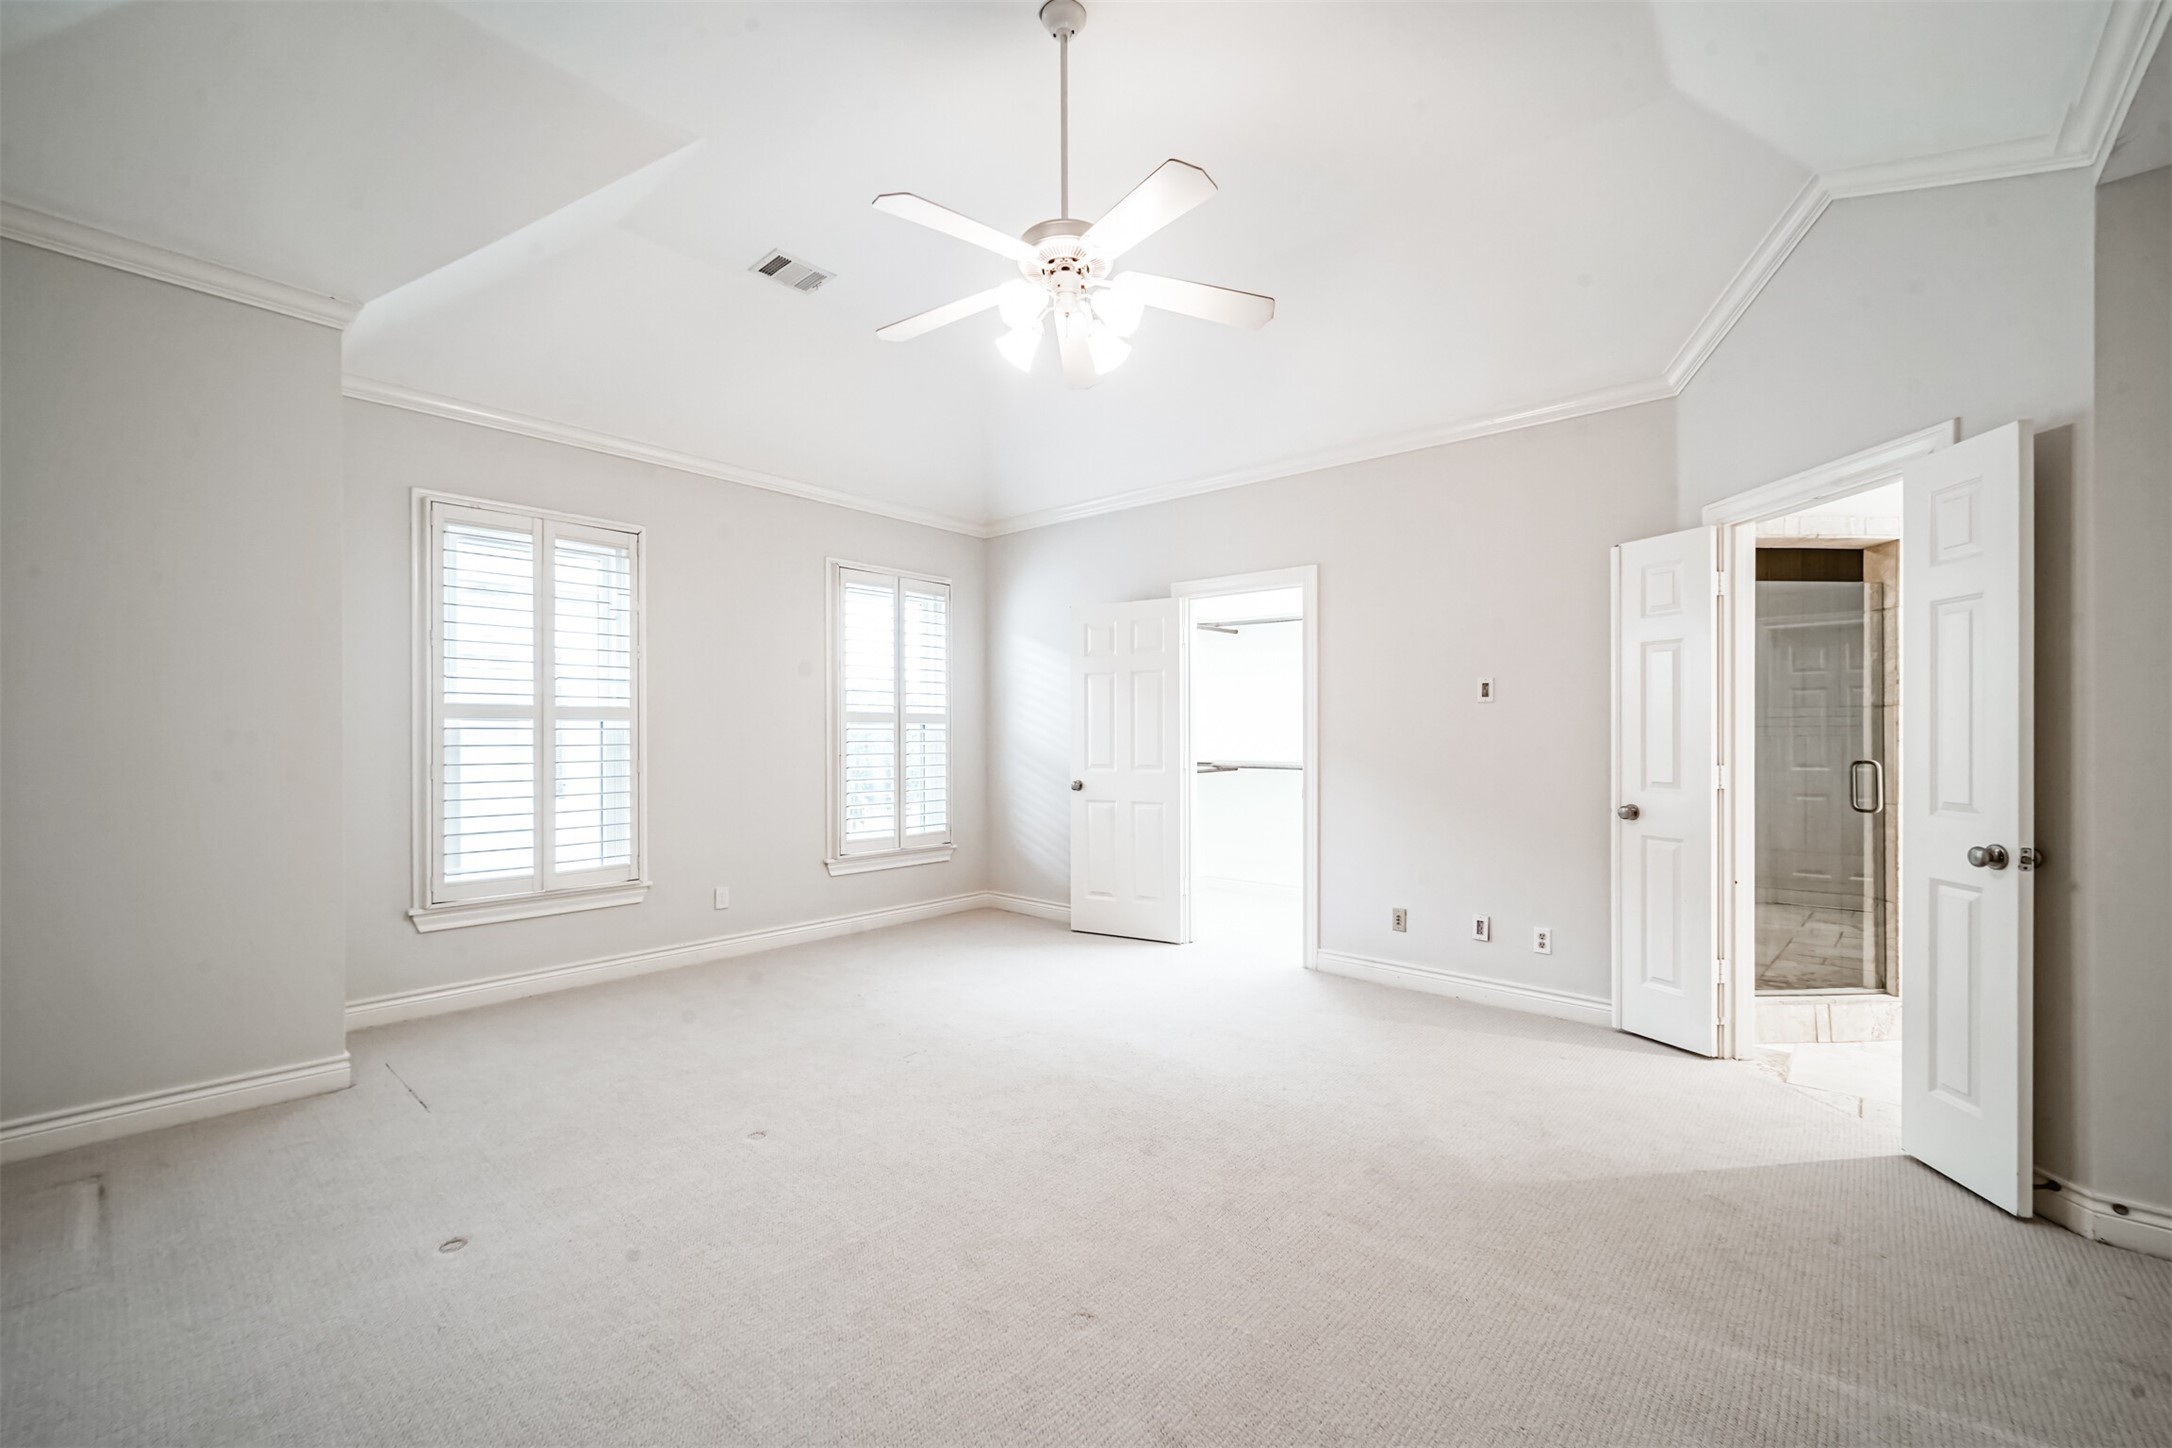 Beautiful light and bright Primary Suite with soaring ceilings, crown molding, and sitting area.